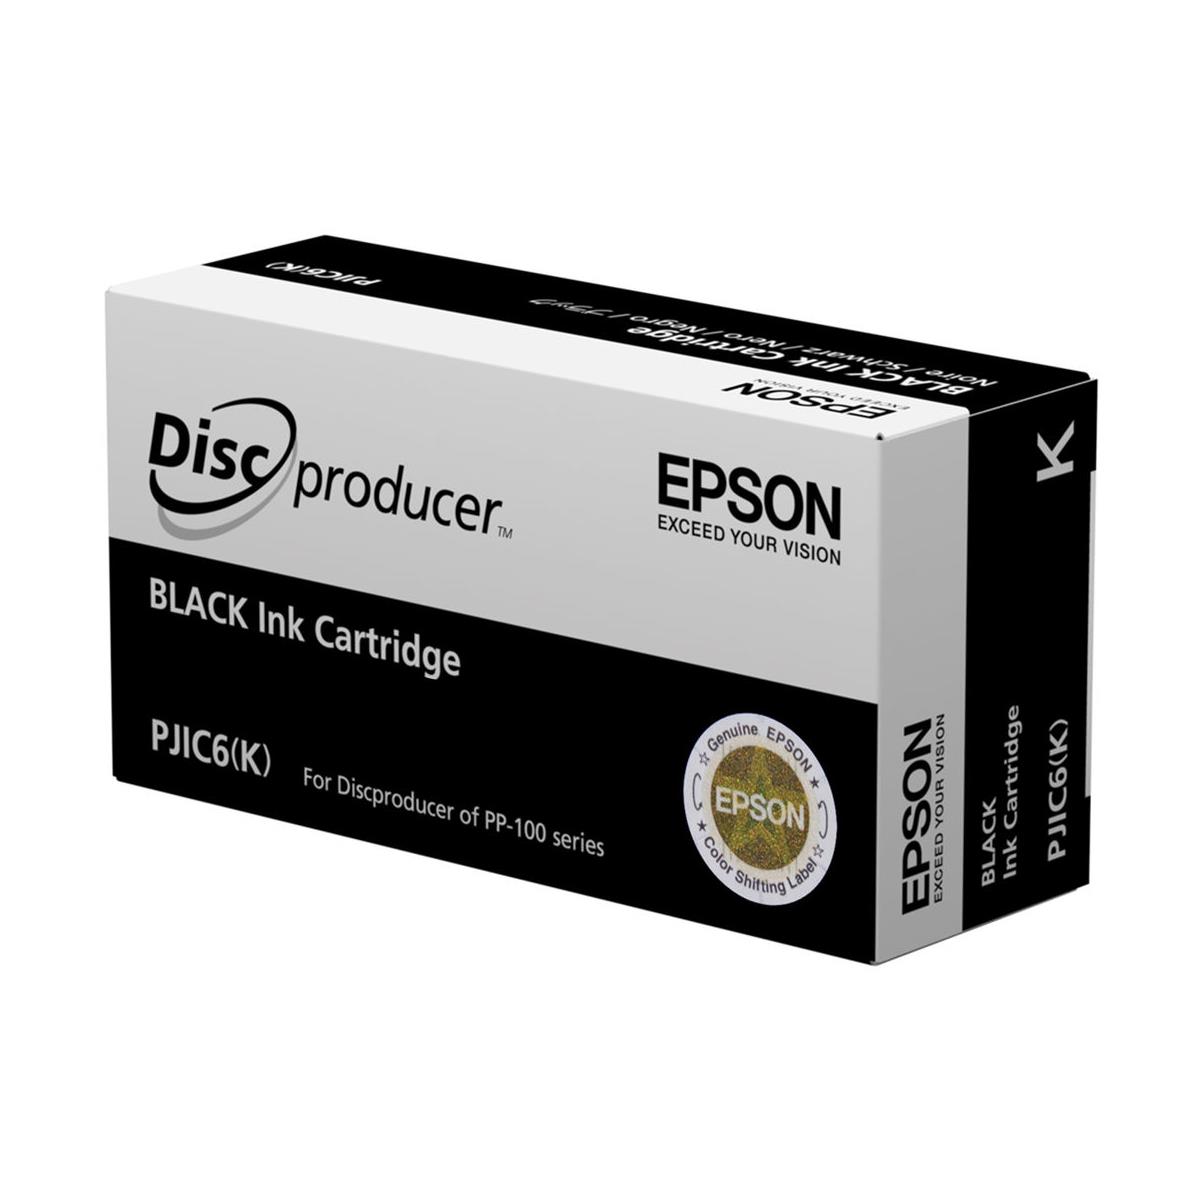 Image of Microboards Technology Epson Black Ink Cartridge for PP-100 Printer